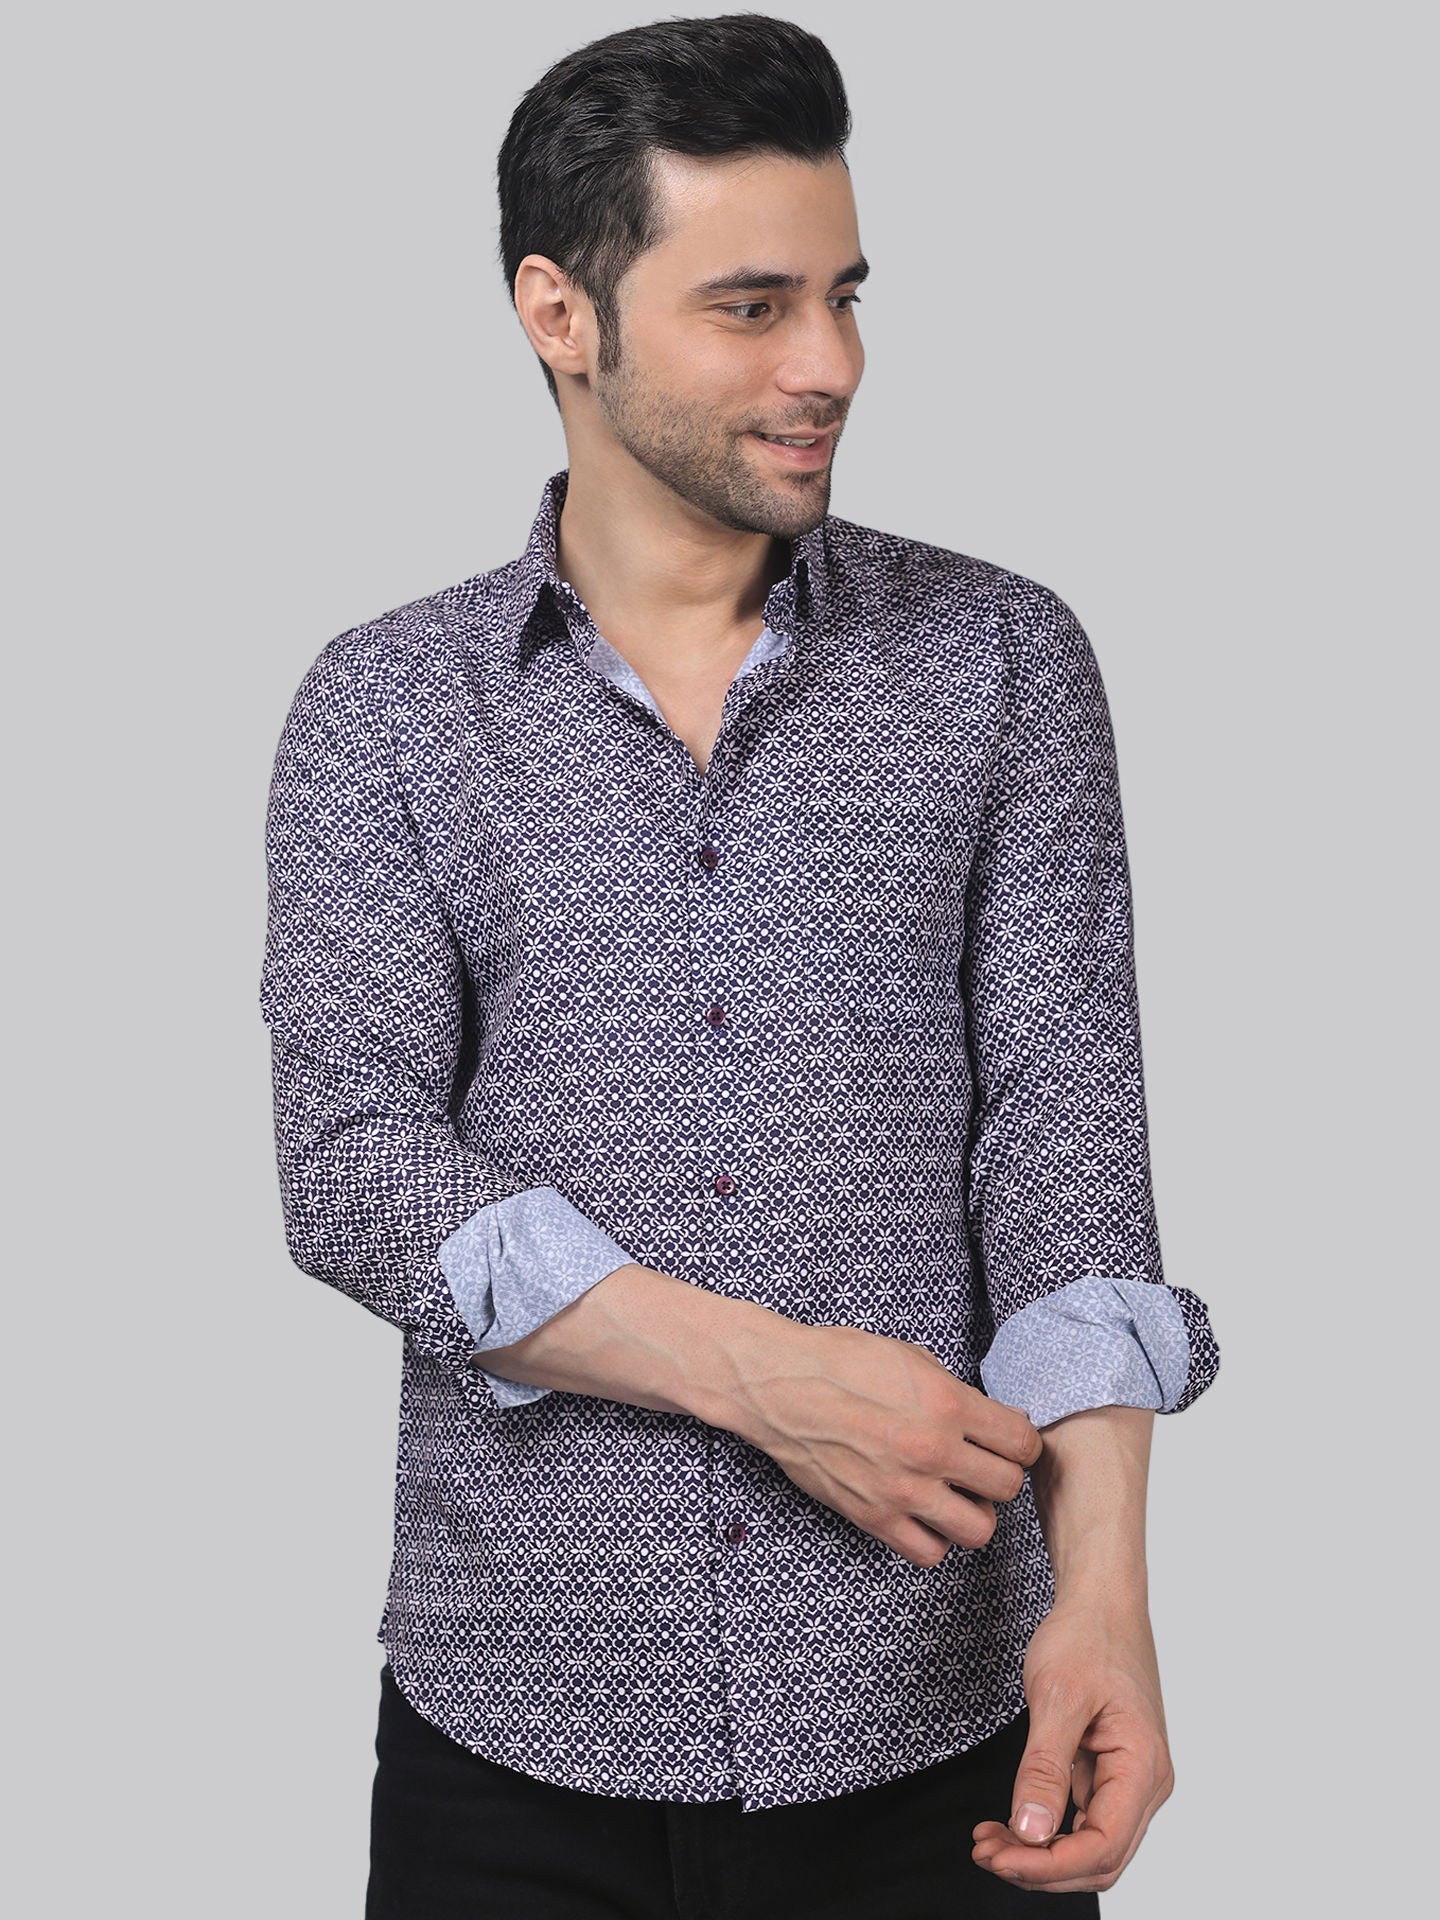 TryBuy Trending Full Sleeve Casual Cotton Printed Shirt for Men - TryBuy® USA🇺🇸